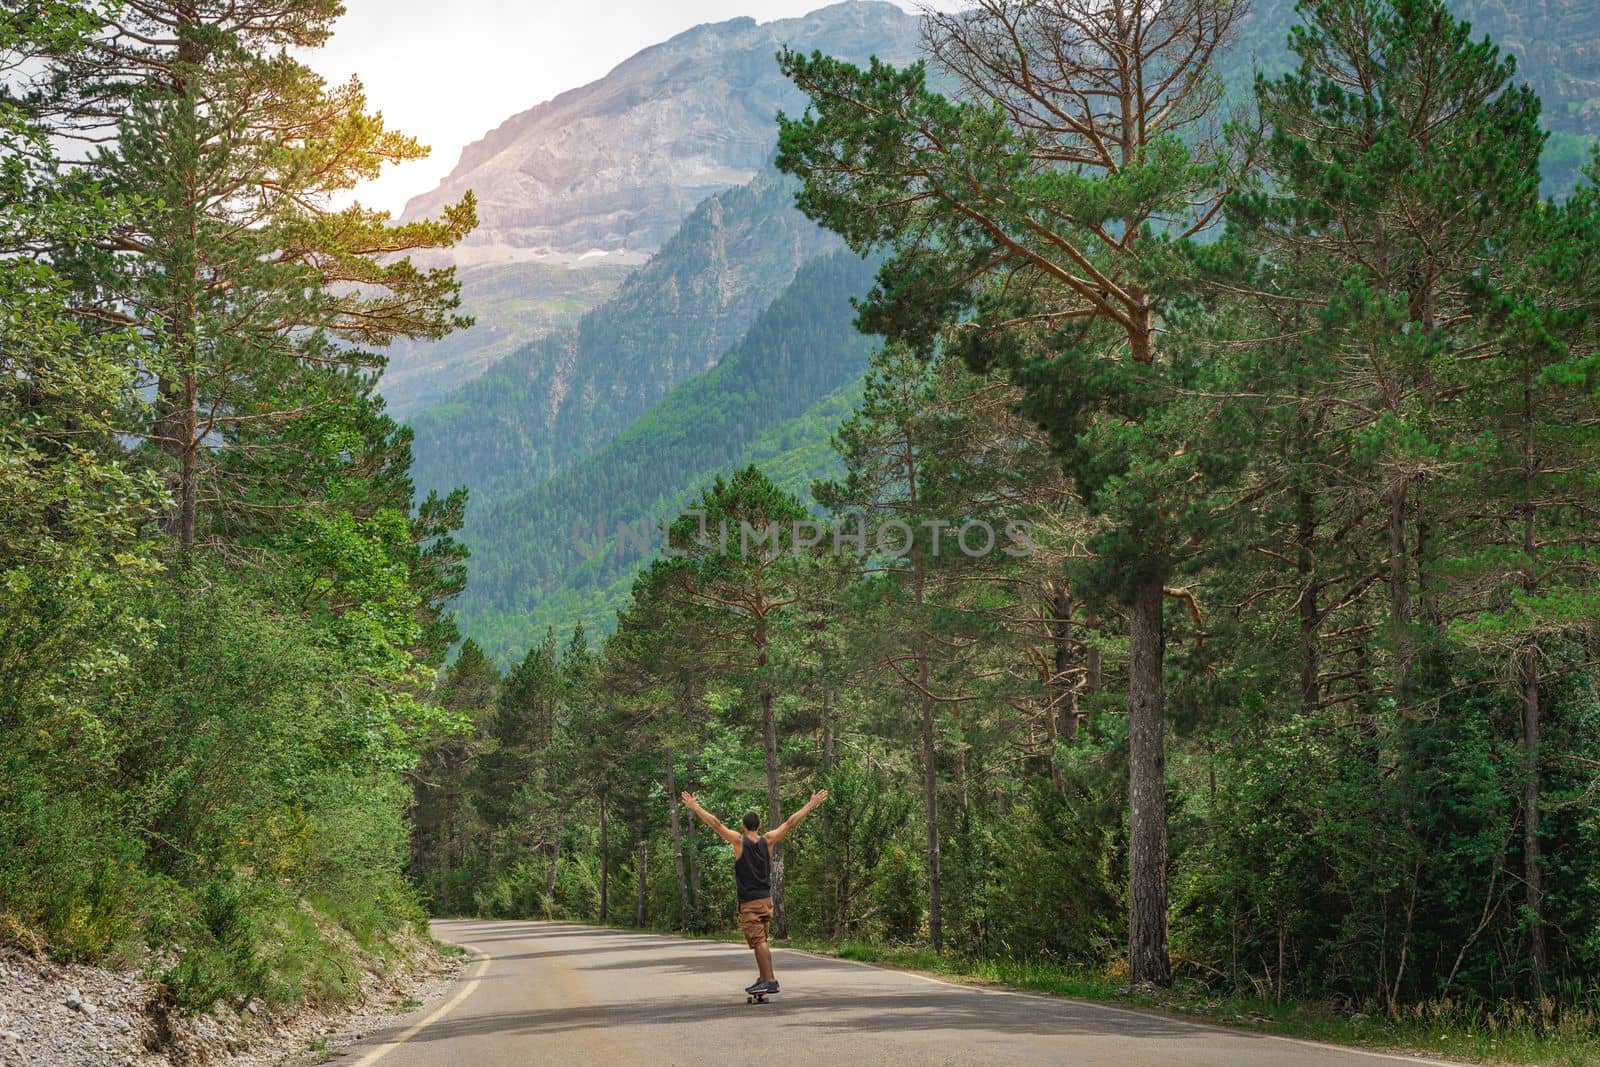 Hipster guy with long board with open arms enjoying life in the middle of a mountain road and a beautiful landscape. High quality photo